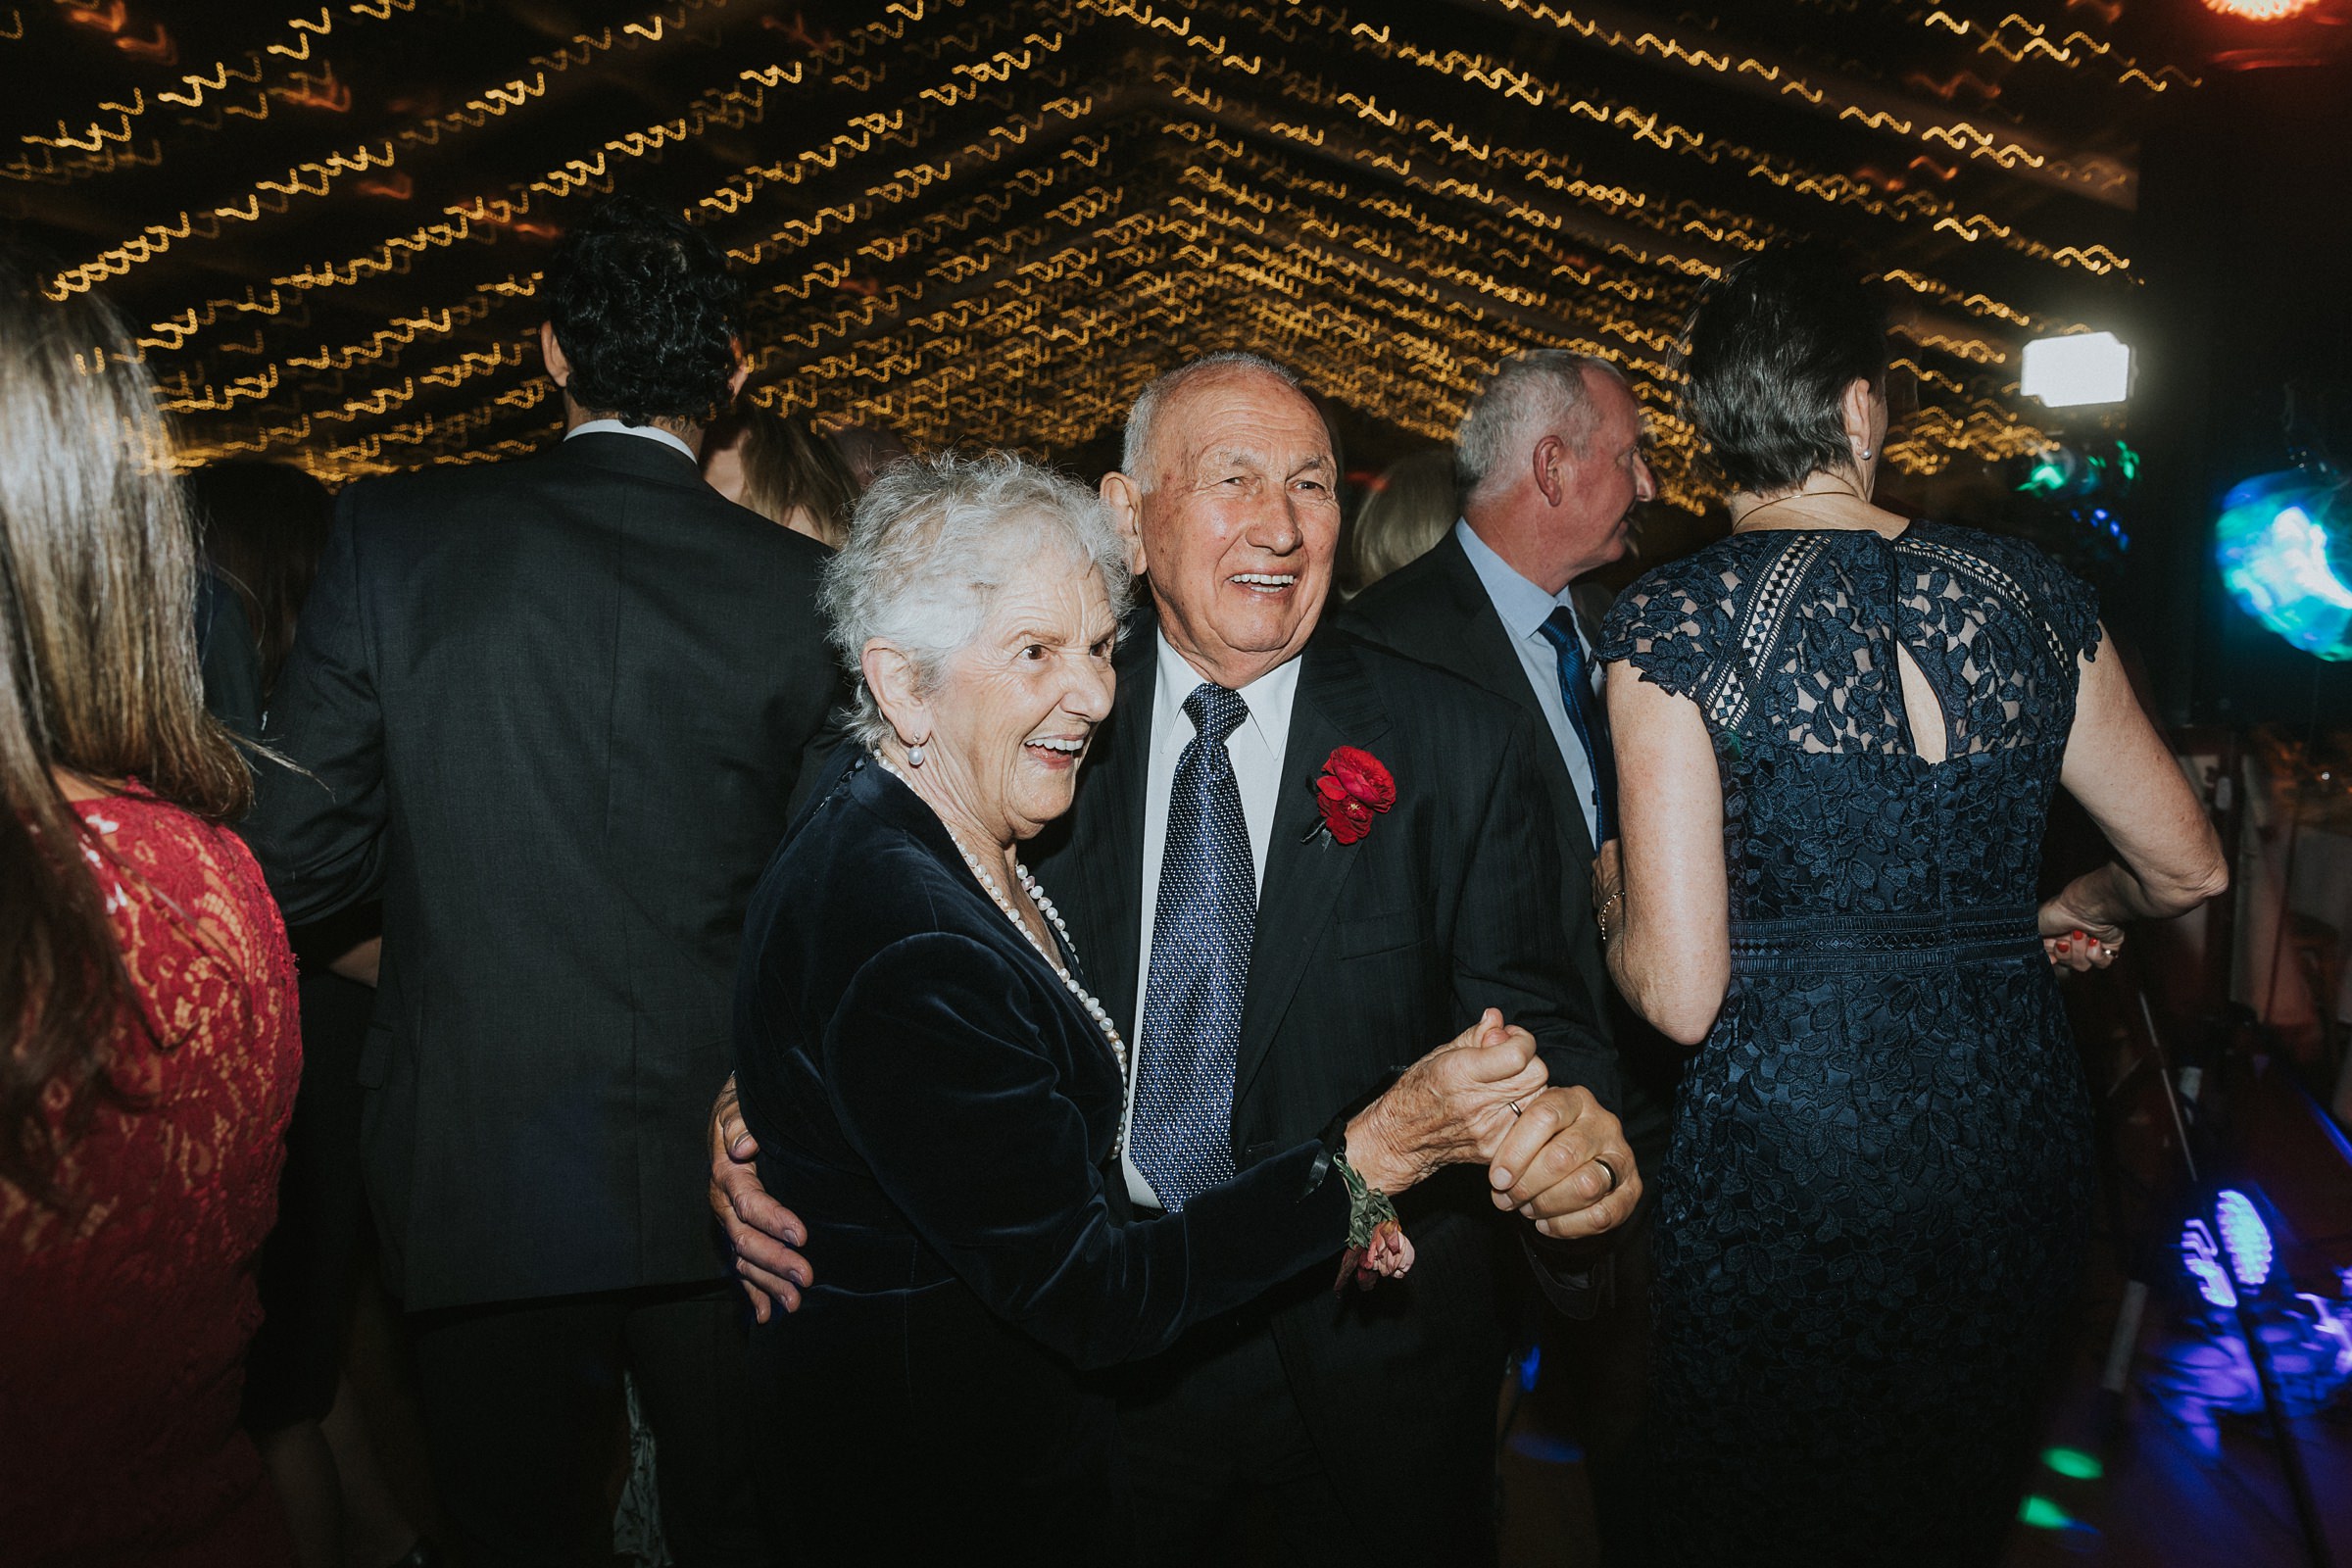 grandparents ripping up the d-floor at wedding reception